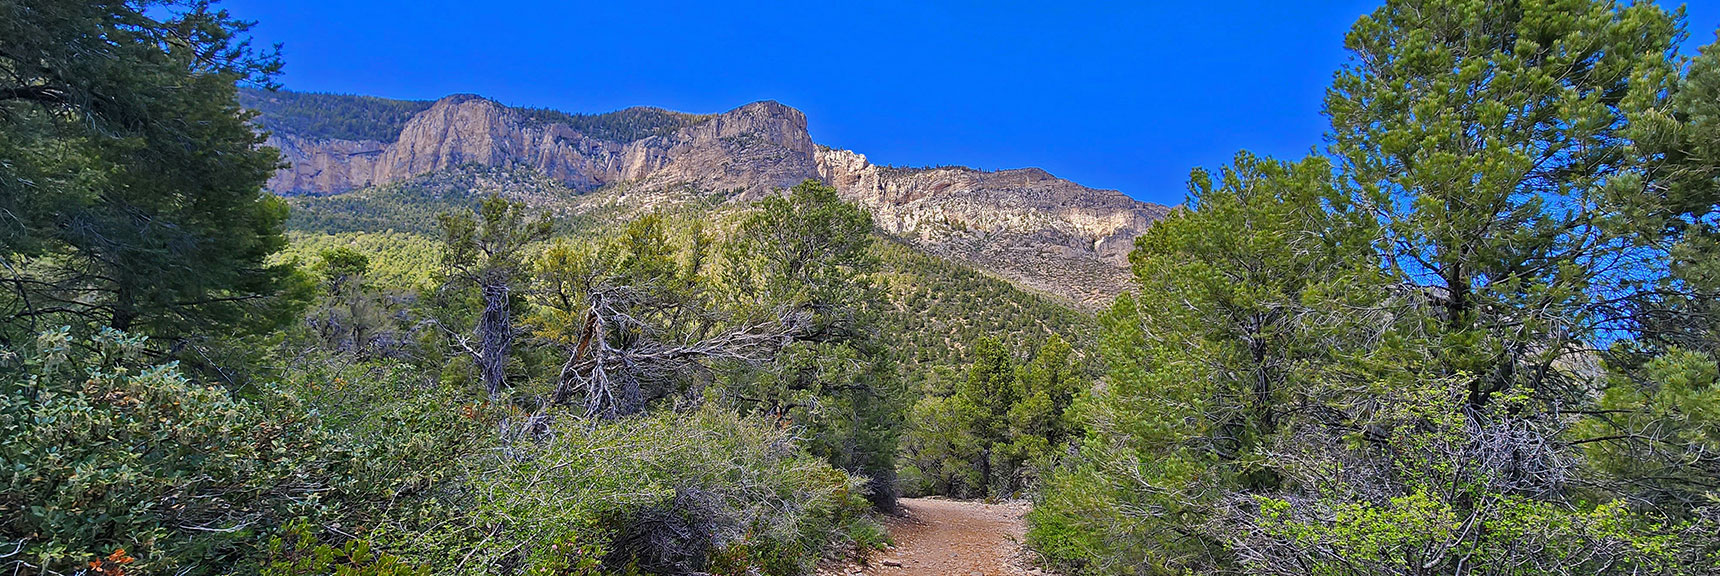 Upper Loop is Forested; Lower Loop More Like a Mountain Meadow | Eagles Nest Loop | Mt Charleston Wilderness | Spring Mountains, Nevada